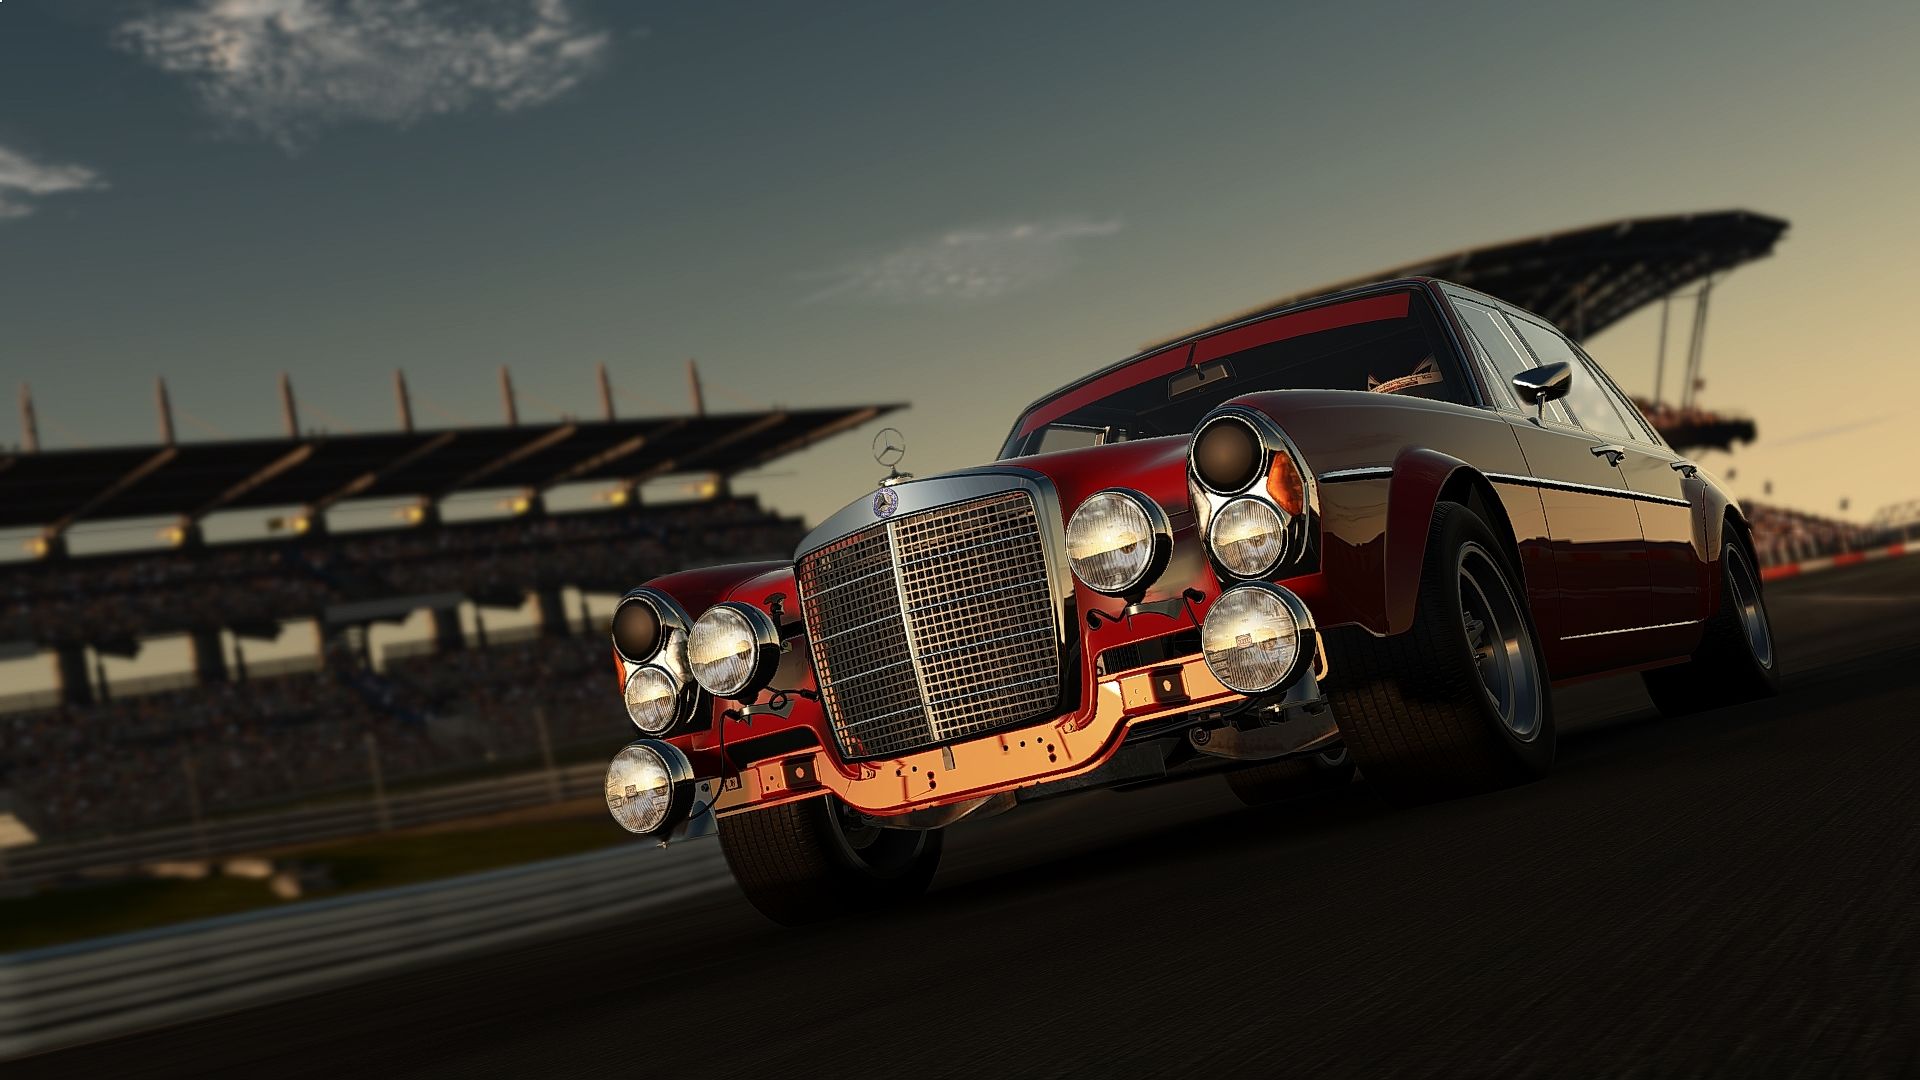 Project Cars Racing Game Screenshots Go For Ultra Realism